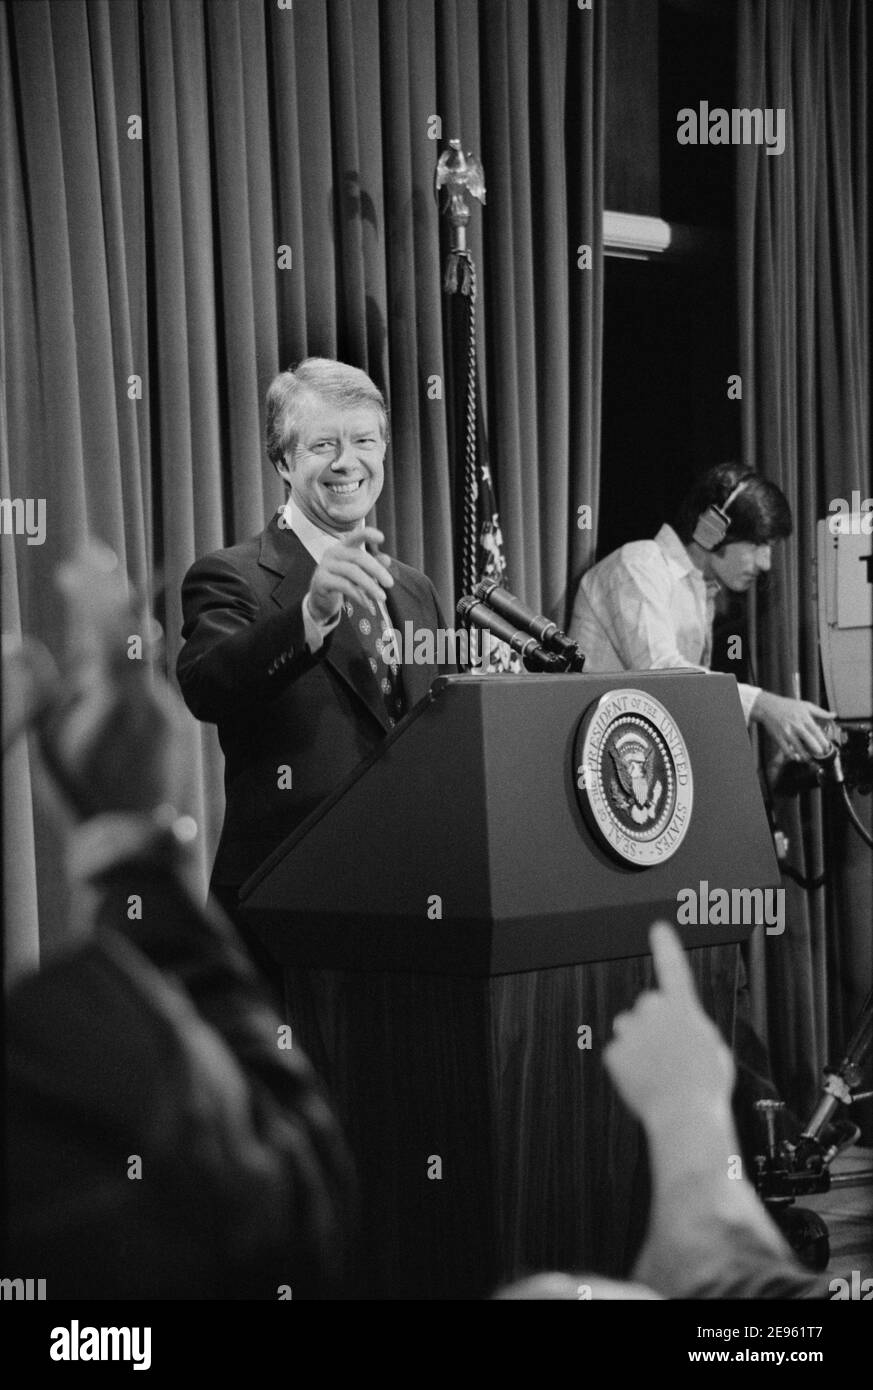 U.S. President Jimmy Carter at a press conference, taking a question, Washington, D.C., USA, Marion S. Trikosko, June 30, 1977 Stock Photo